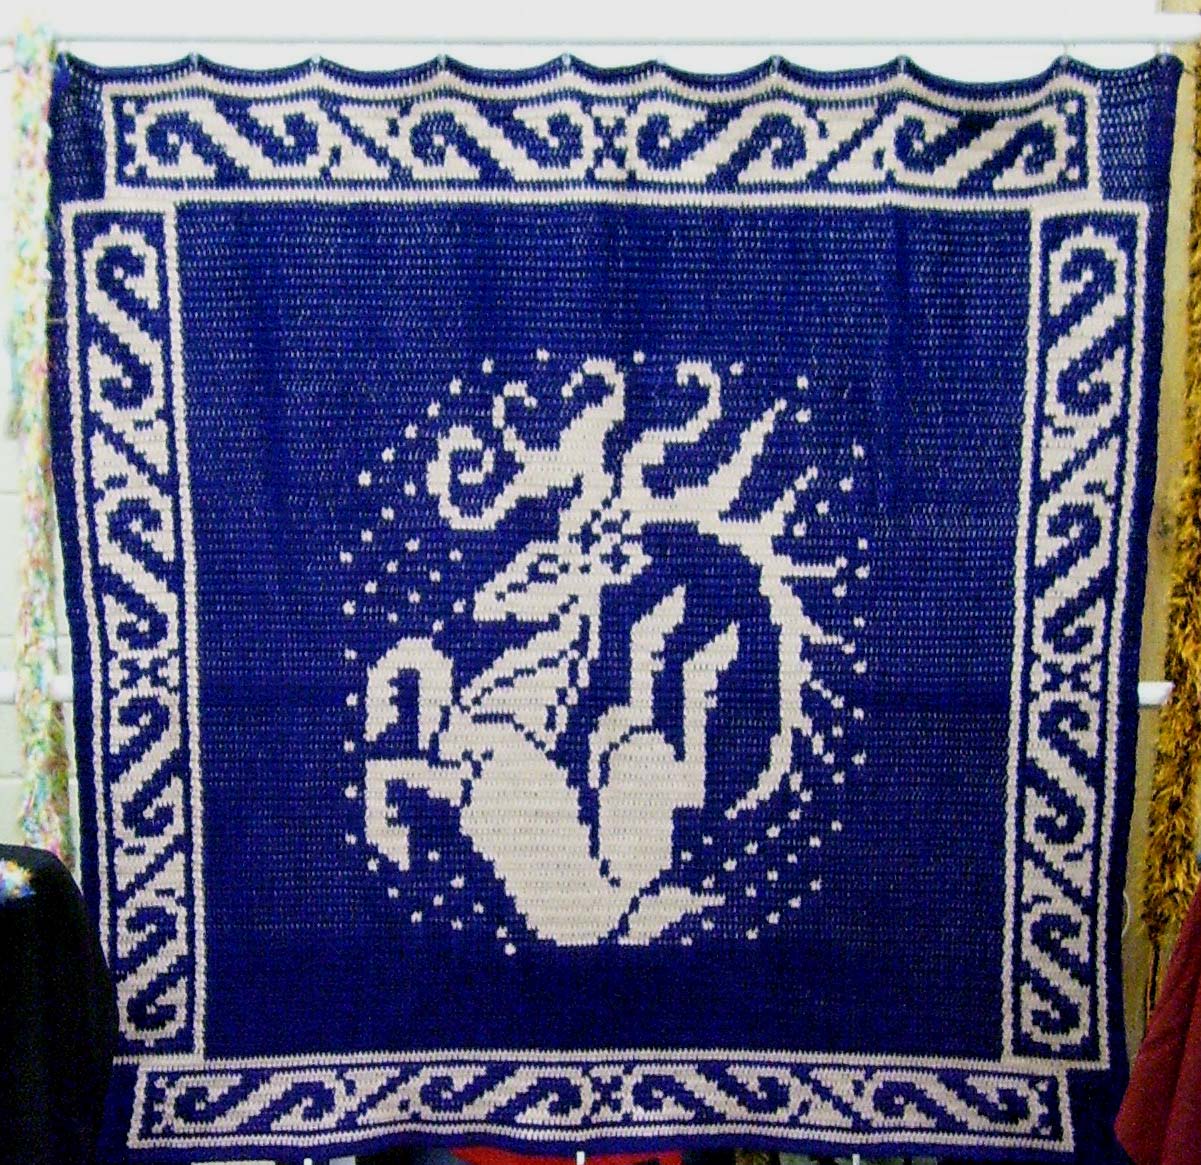 HISTORICAL TAPESTRY CROCHET | EHOW.COM